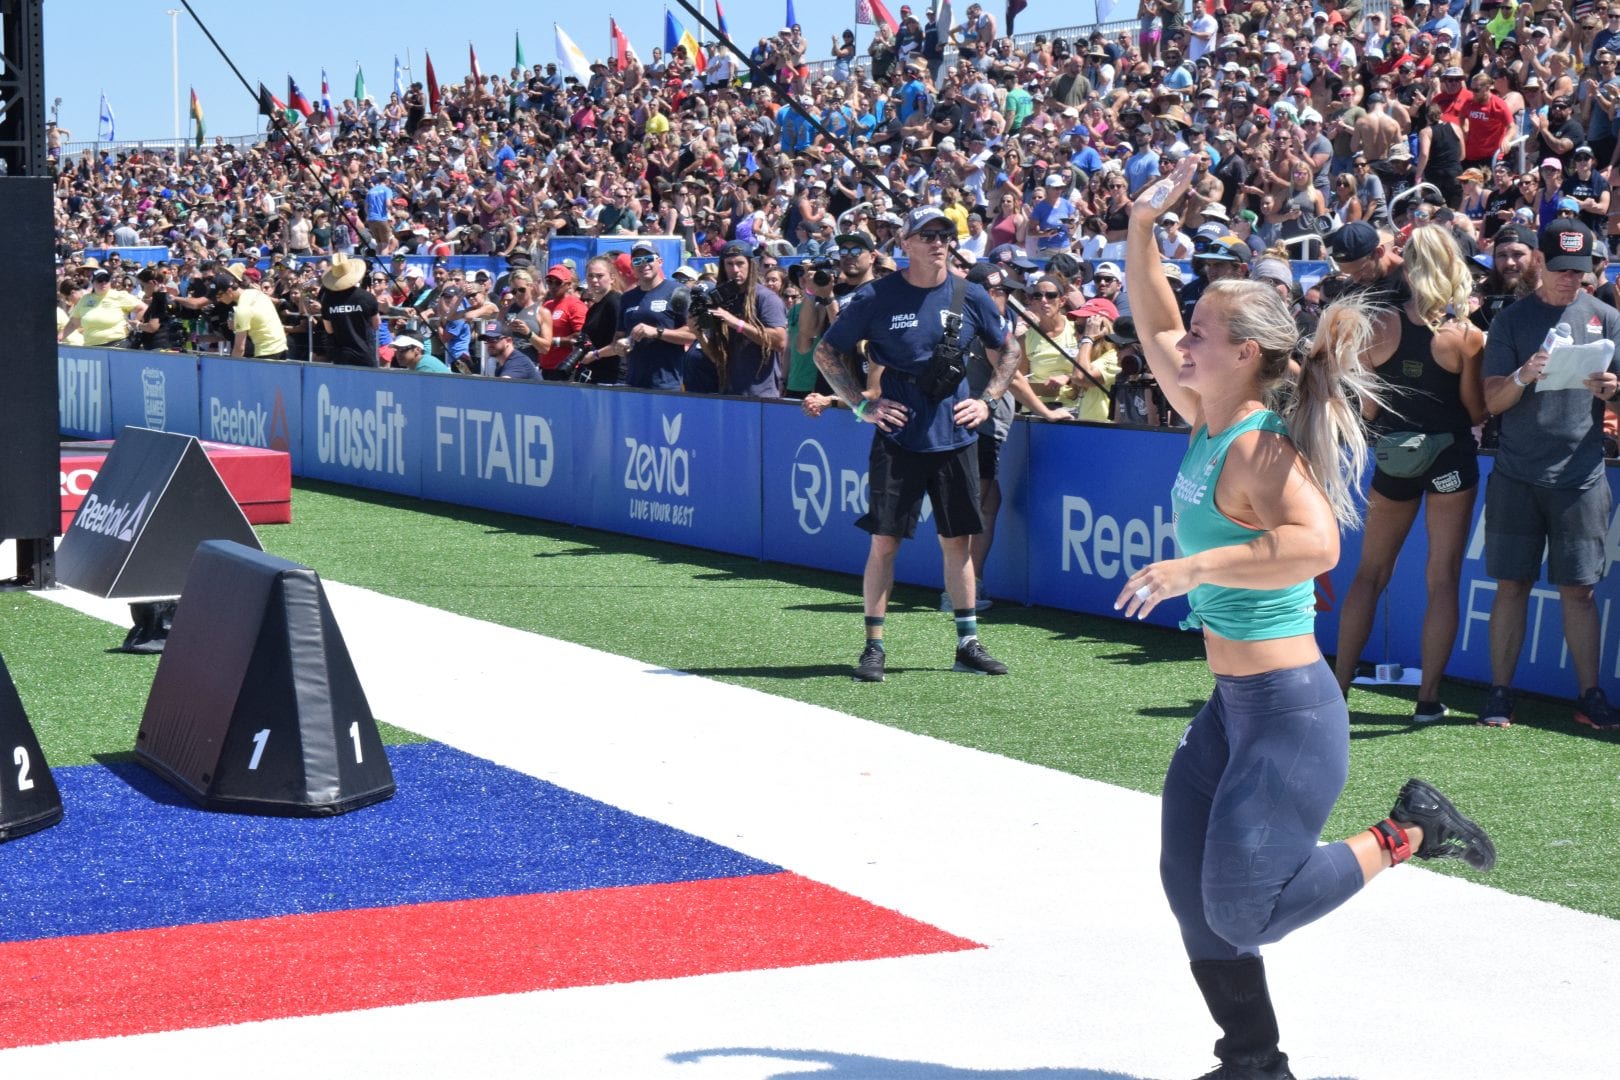 Dani Speegle enters the outdoor stadium of the 2019 CrossFit Games. She'll be competing in the second season of The Titan Games.